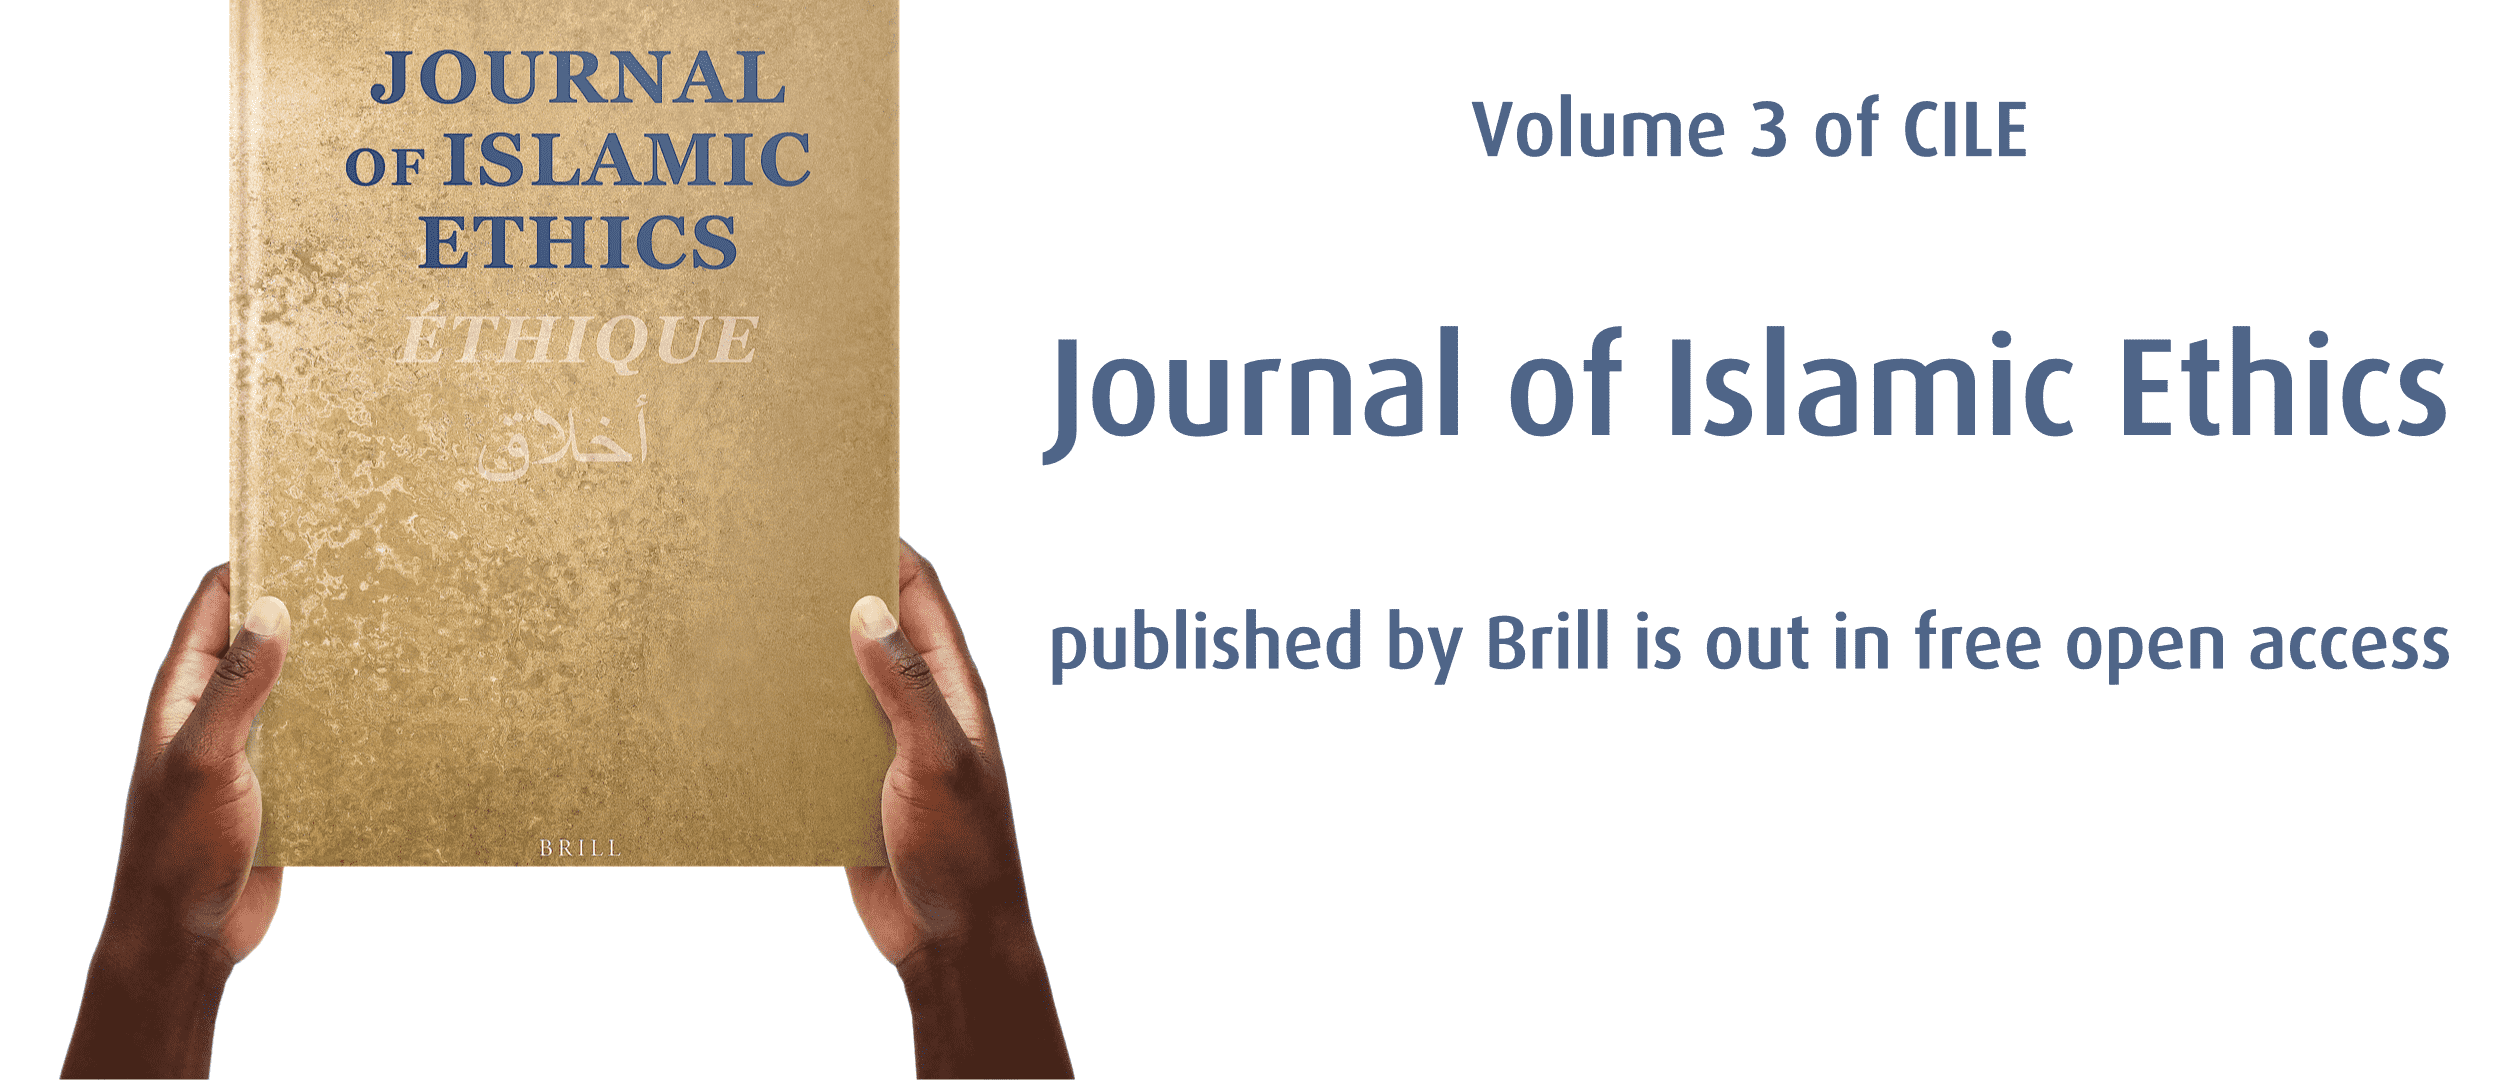 Volume 3 of CILE "Journal of Islamic Ethics" published by Brill is out in free open access